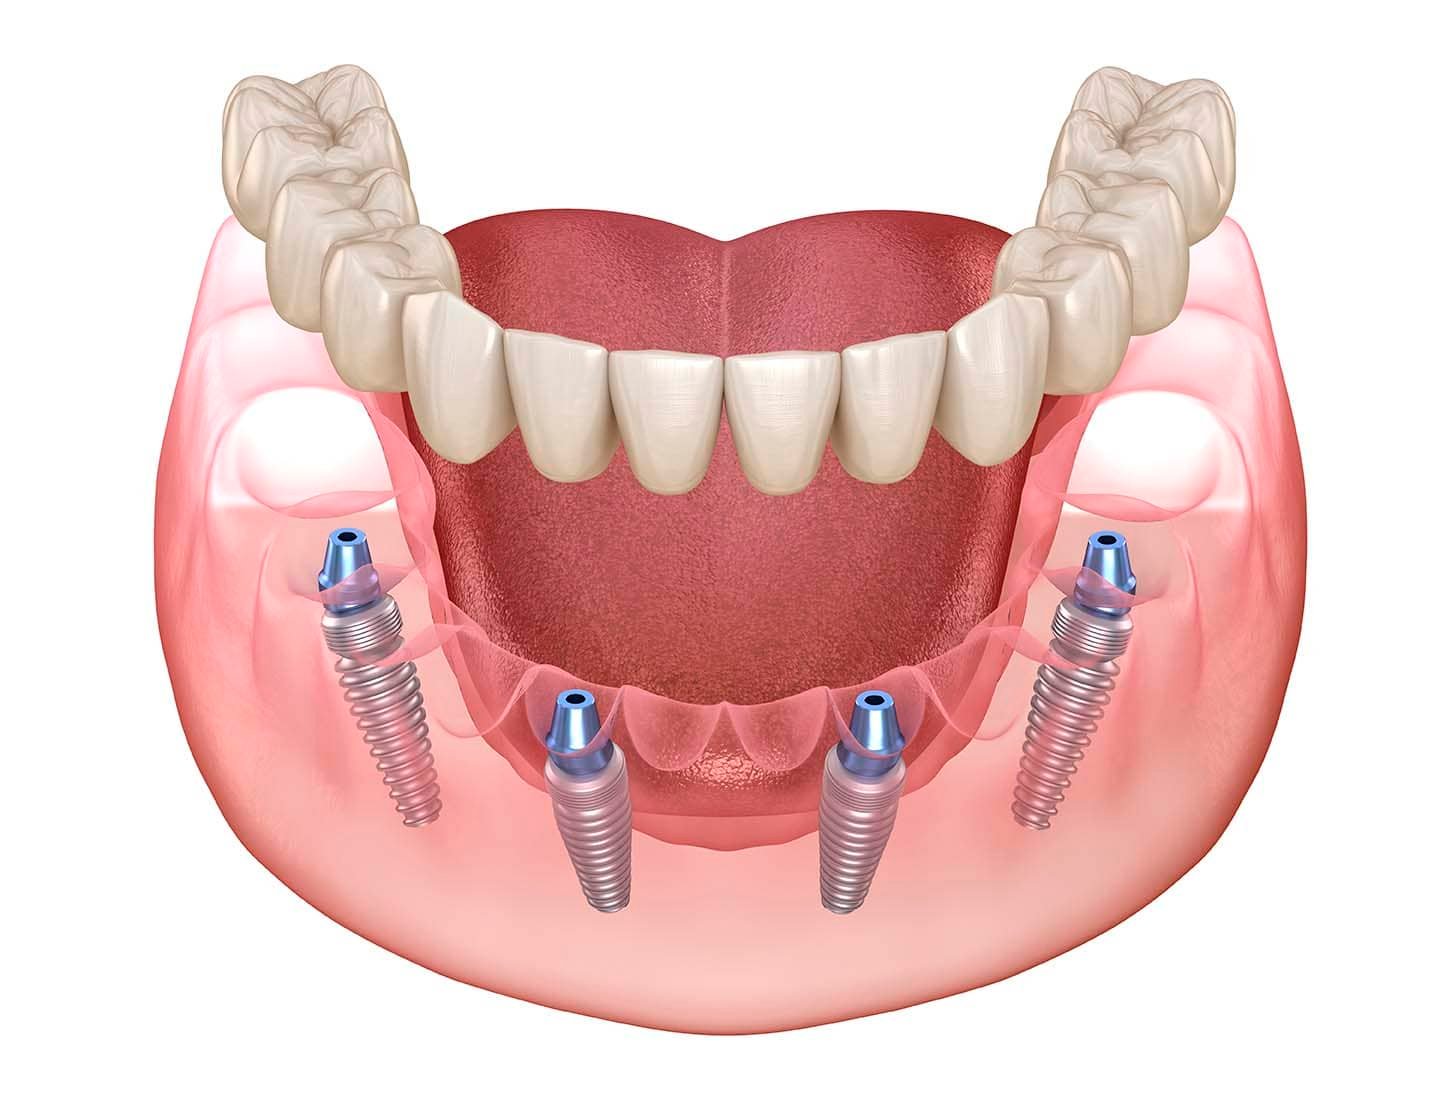 All-on-4 implant denture maral dental clinic your denture specialists Scarborough